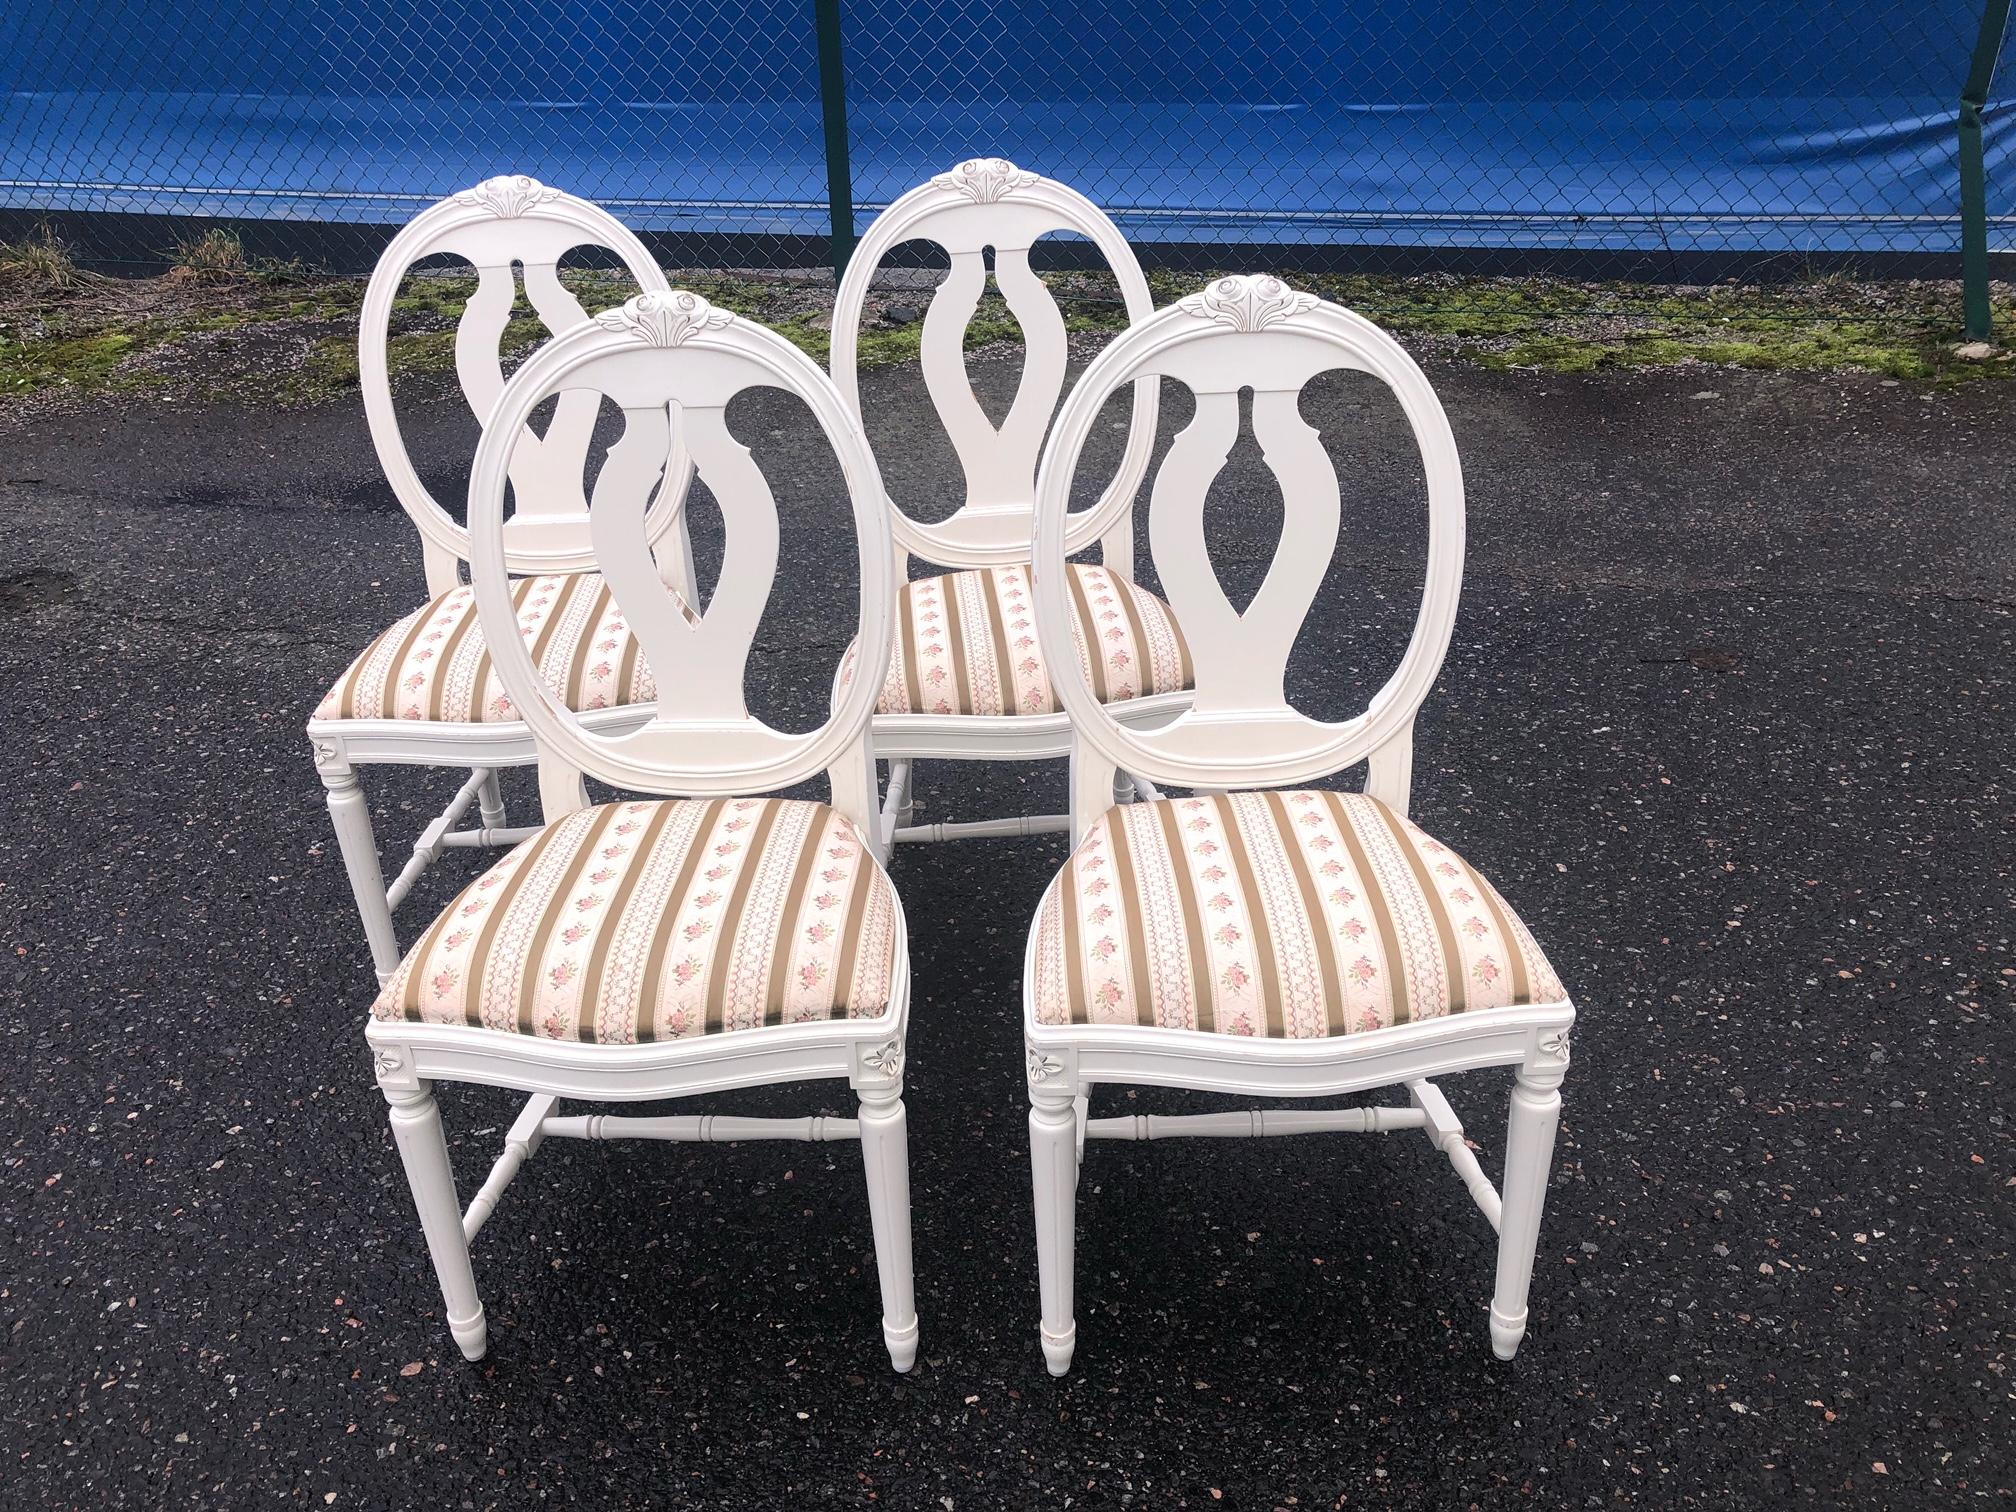 Set of 4 Swedish Gustavian roseback dining chairs in good condition in white with lovely carvings,

circa mid to later 20th century (1960s-80s) and great for every day usage with comfy seats in a neutral fabric

They will ship in the original